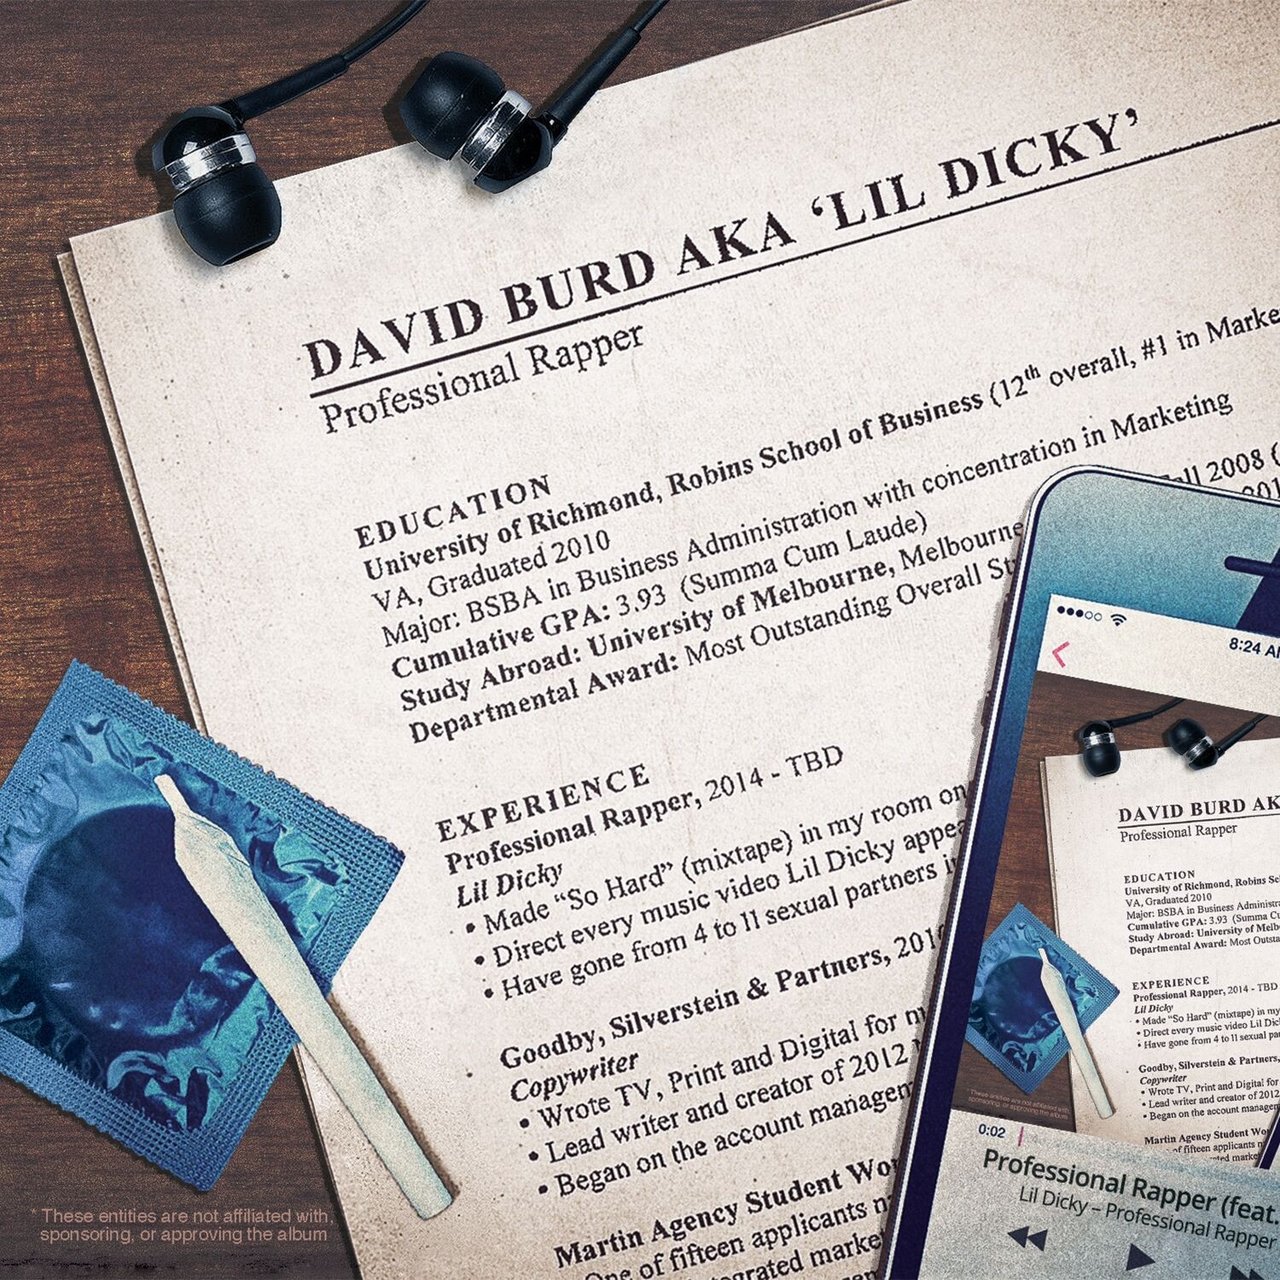 Lil Dicky Professional Rapper cover artwork